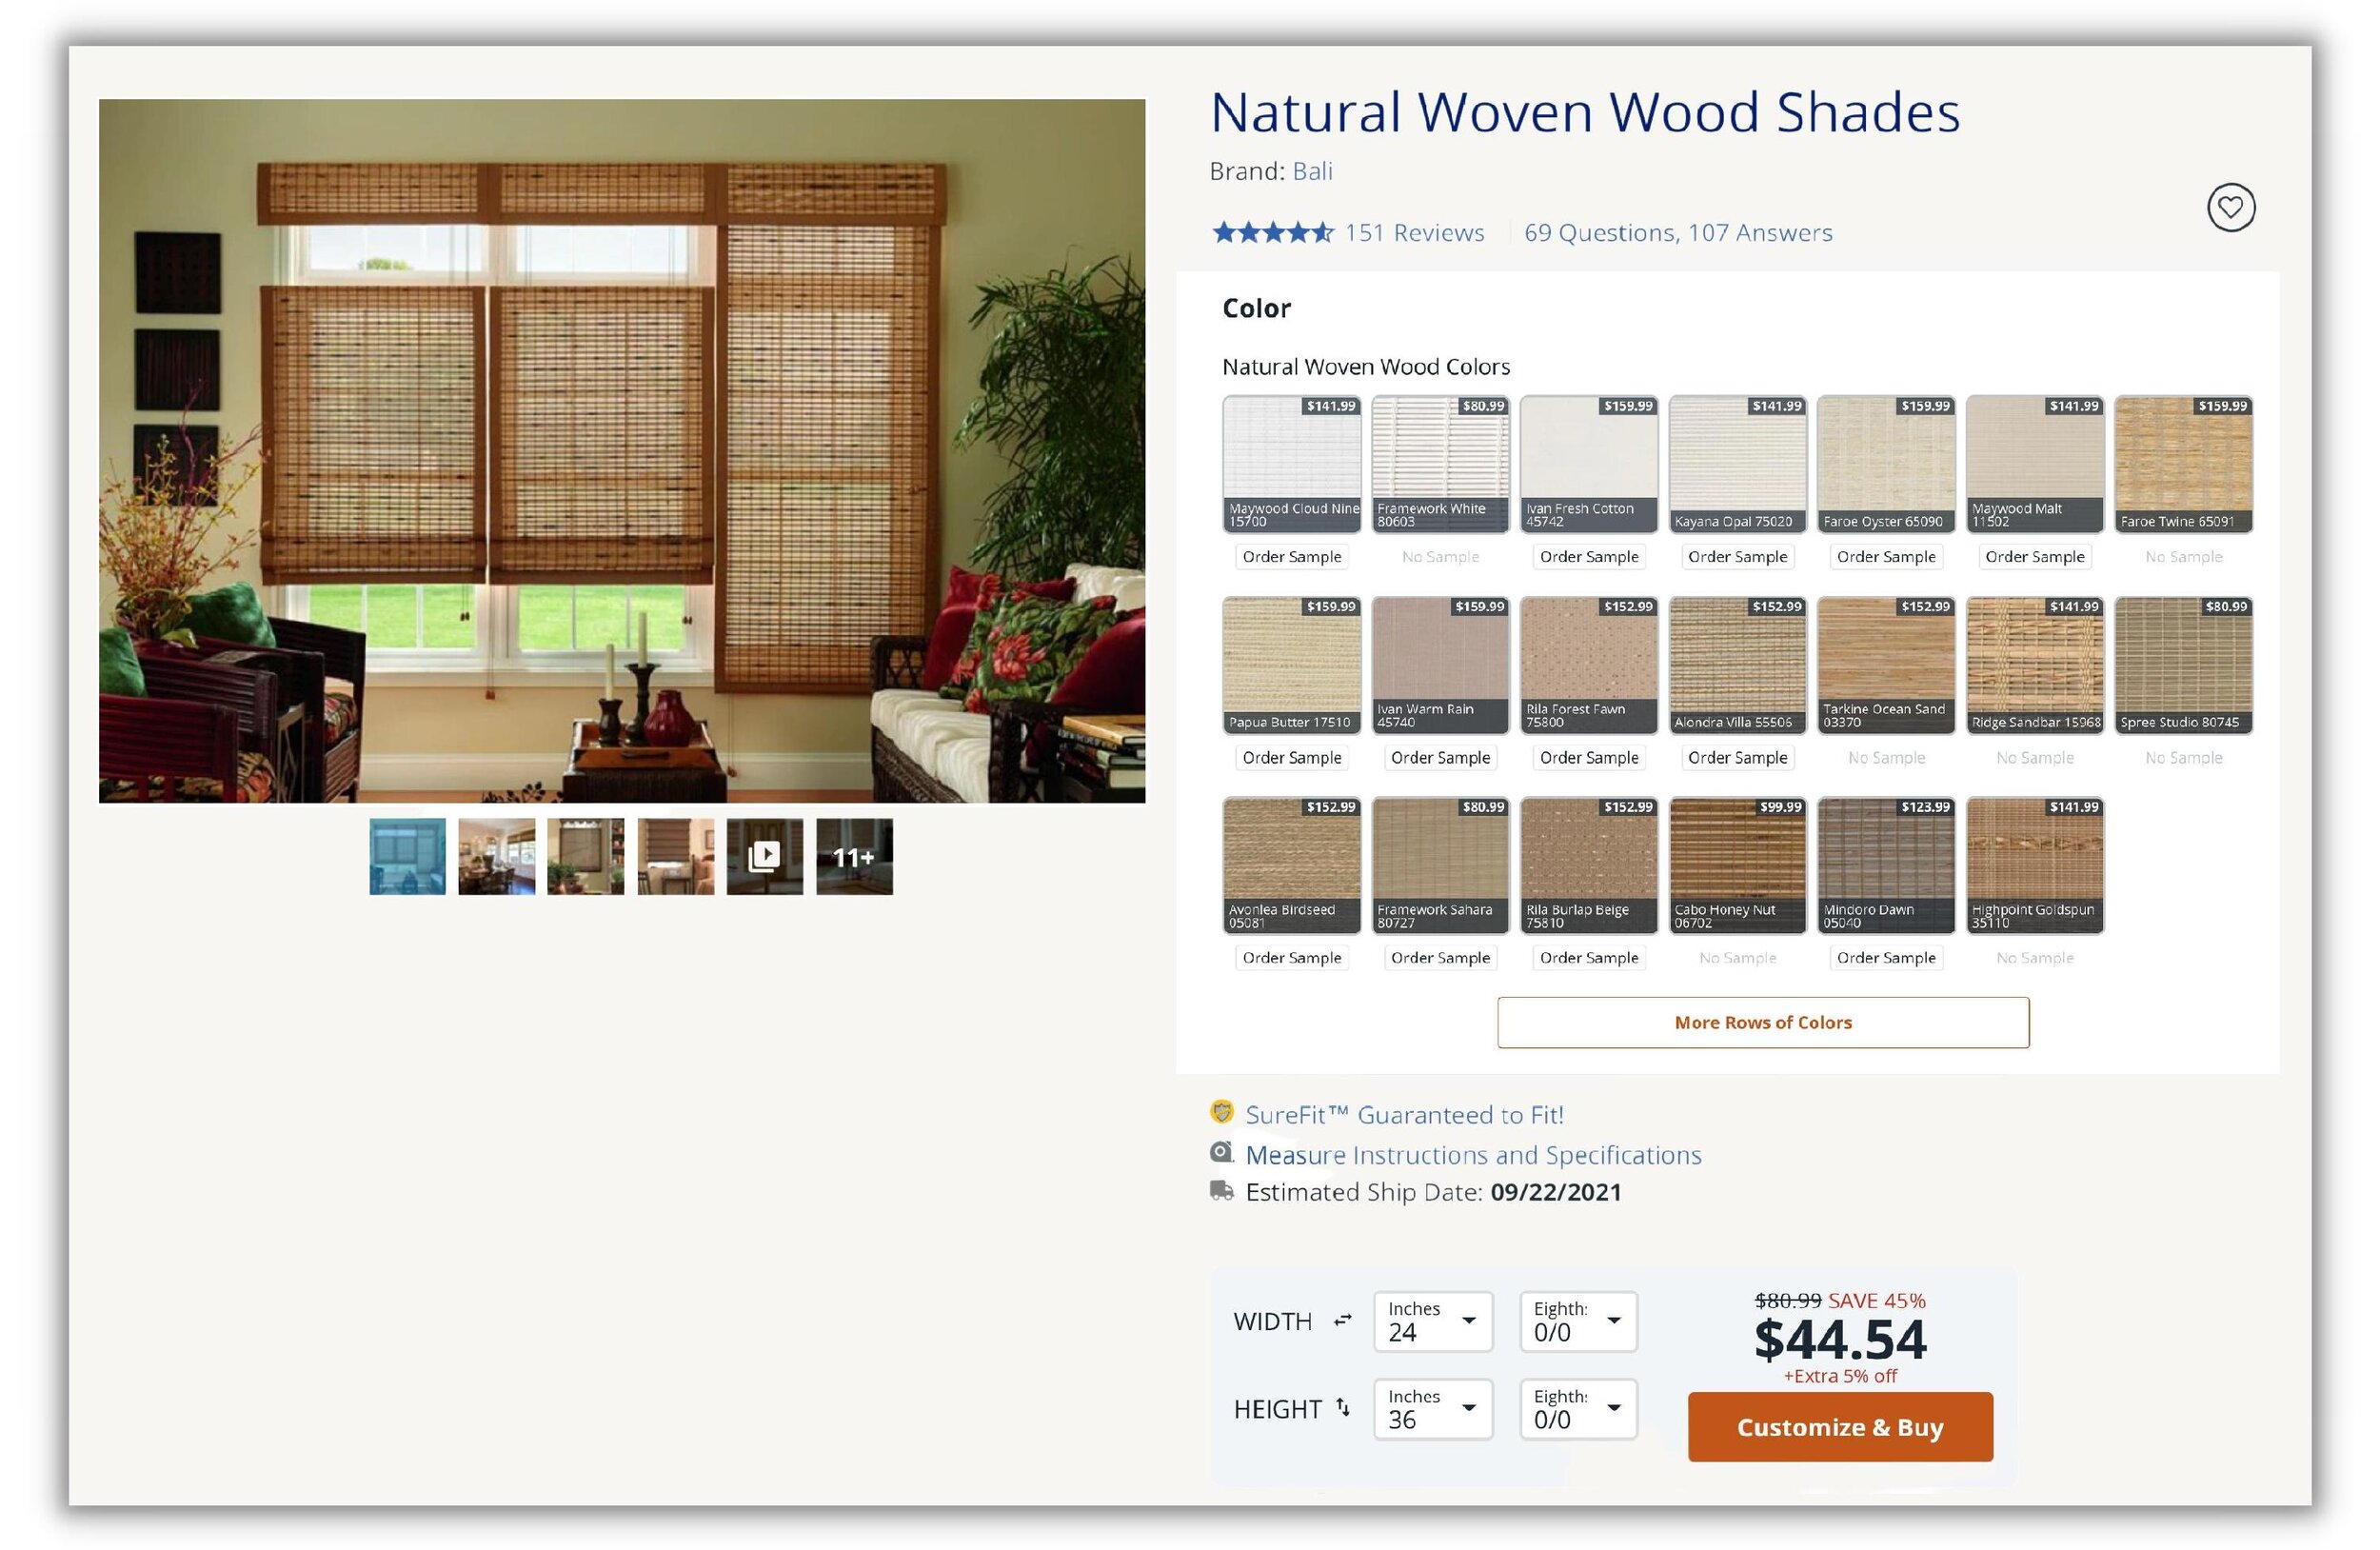 FAQ And Honest Review Of Our Bali Natural Woven Roman Shades | Nadine Stay - Where to buy custom blinds and shades. Natural wood woven shade in a dark brown color. Modern cabin bedroom styling and window covering tips.